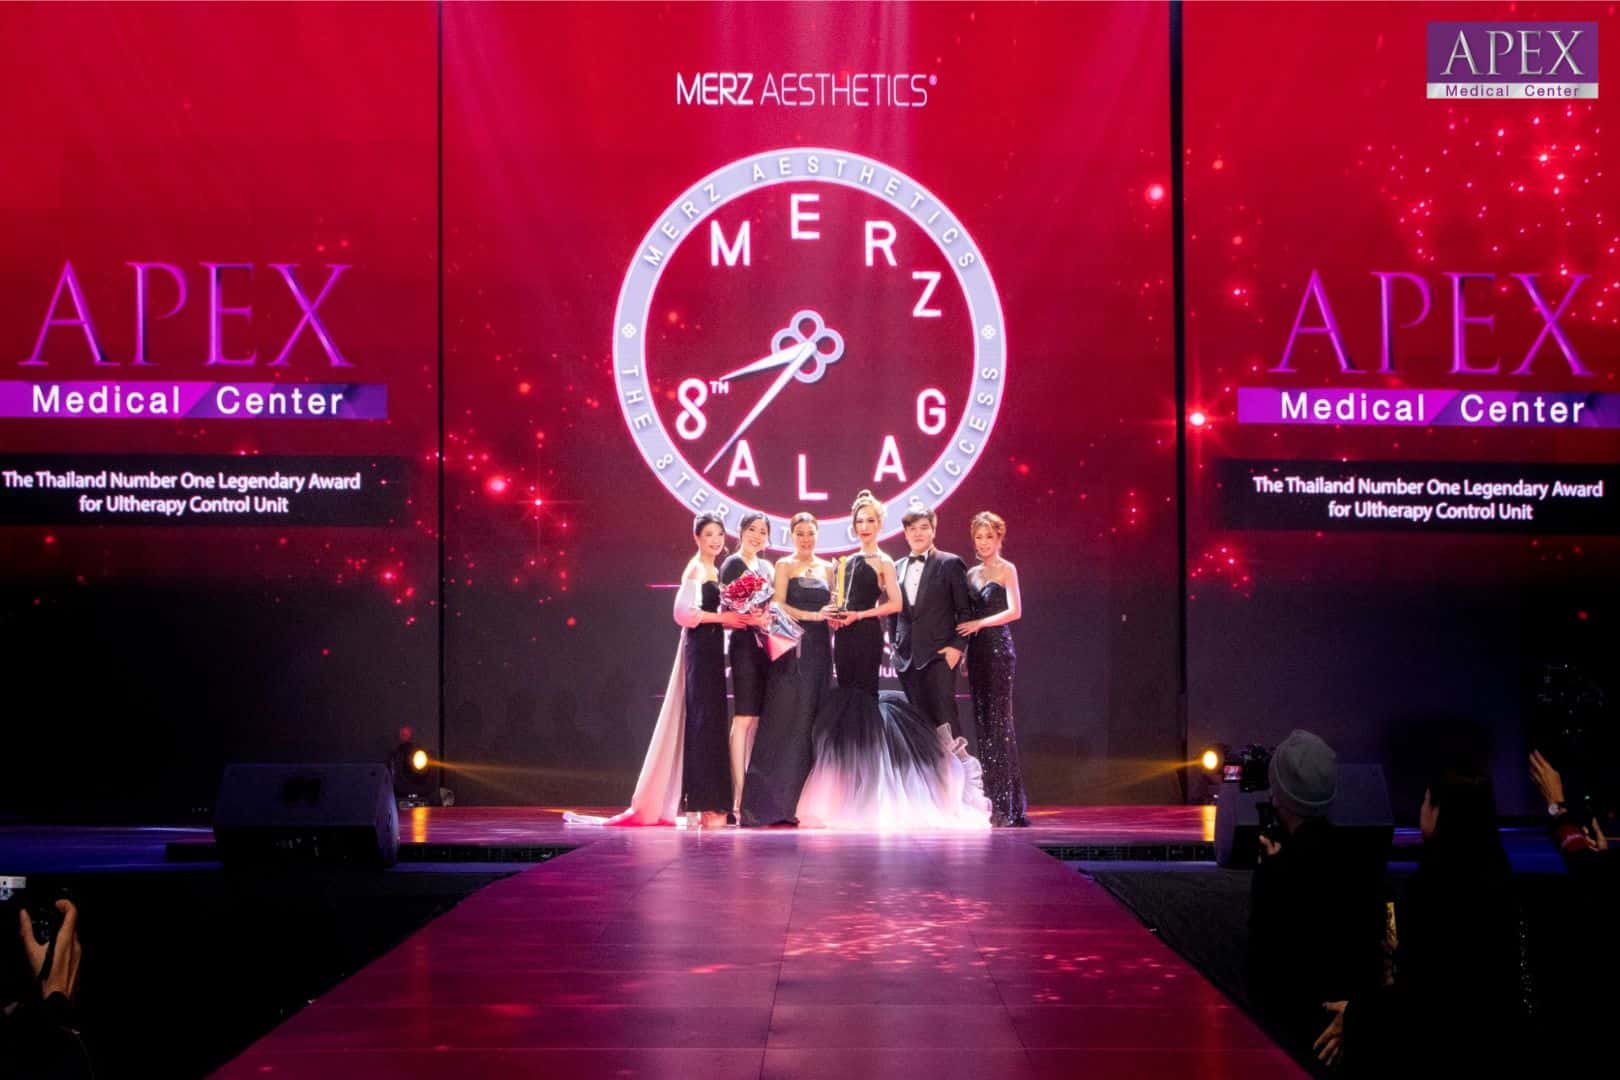 Apex finally wins The Thailand Number One Legendary Award for Ultherapy Control Unit No. 1 service provider in Thailand 02